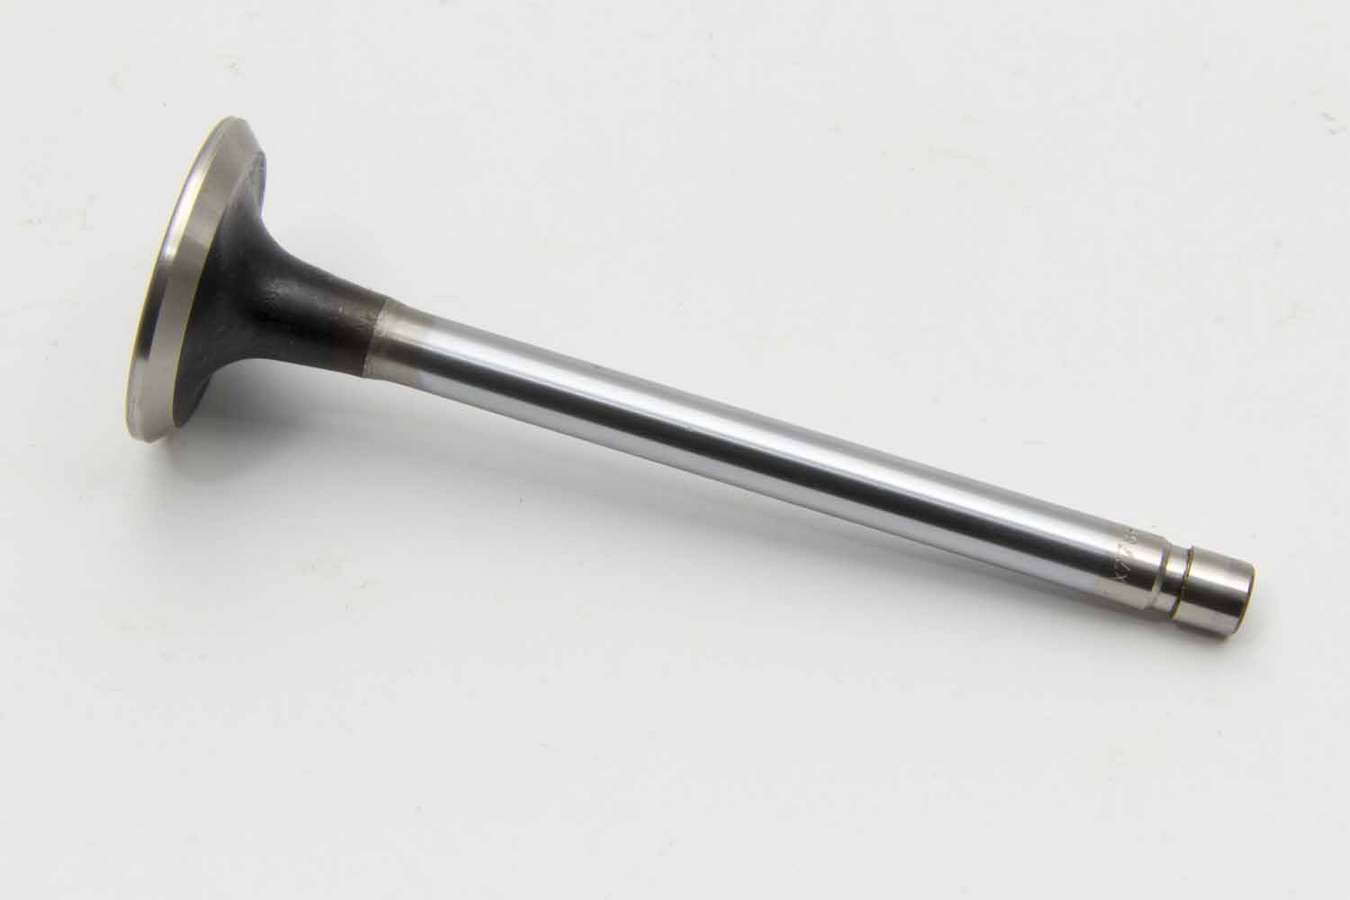 Manley 10549-1 Exhaust Valve, Budget Series, 1.600 in Head, 0.342 in Valve Stem, 4.911 in Long, Stainless, Small Block Chevy / Ford, Each